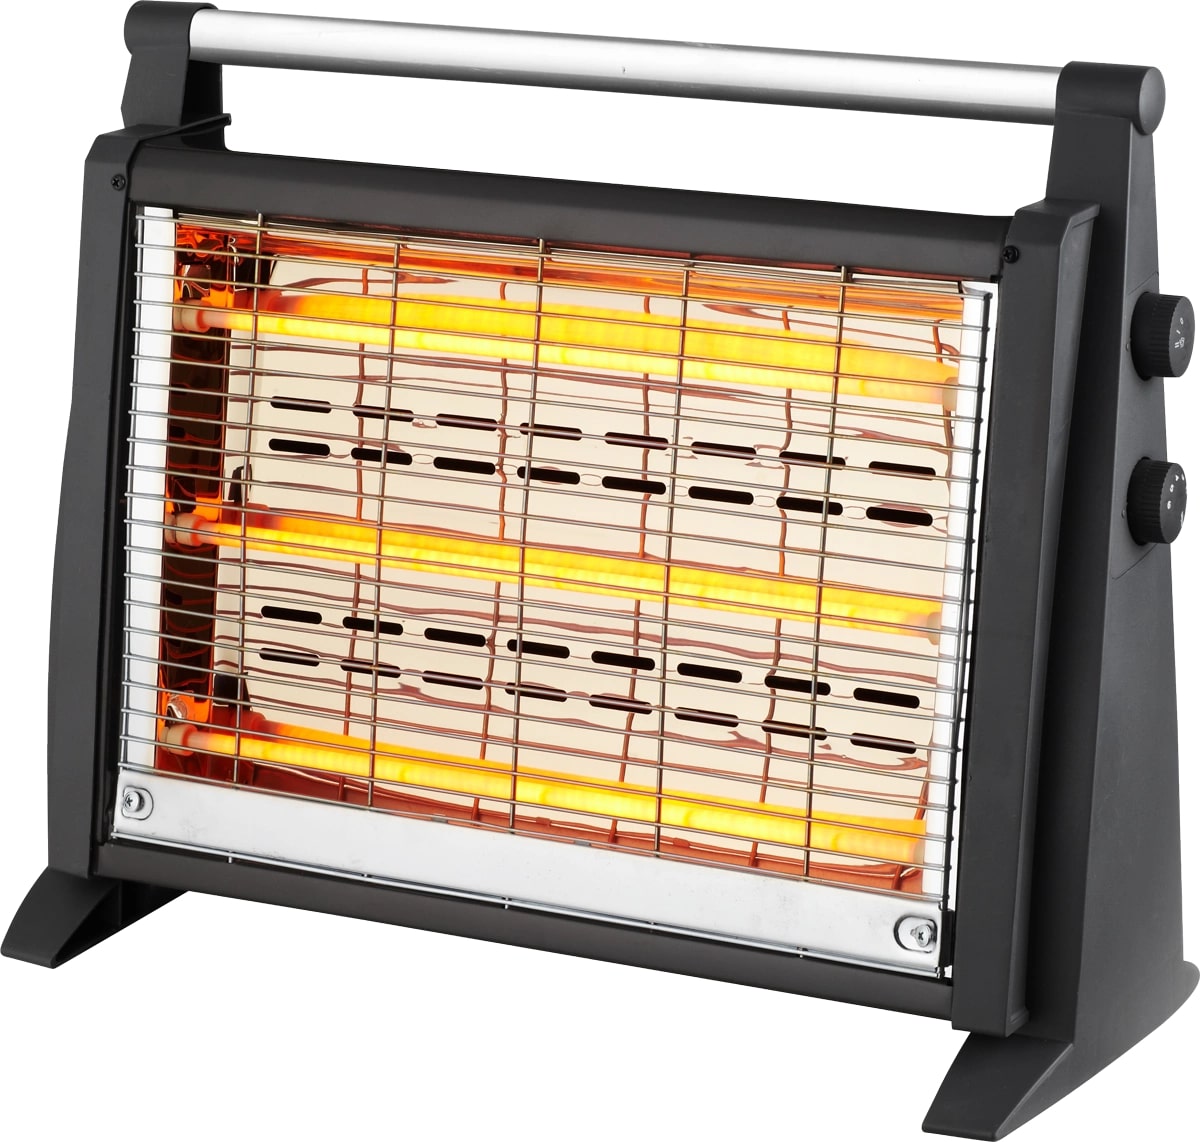 Electromatic Electric Heater, 1800W, 2 Heat Levels, Fall Safety System